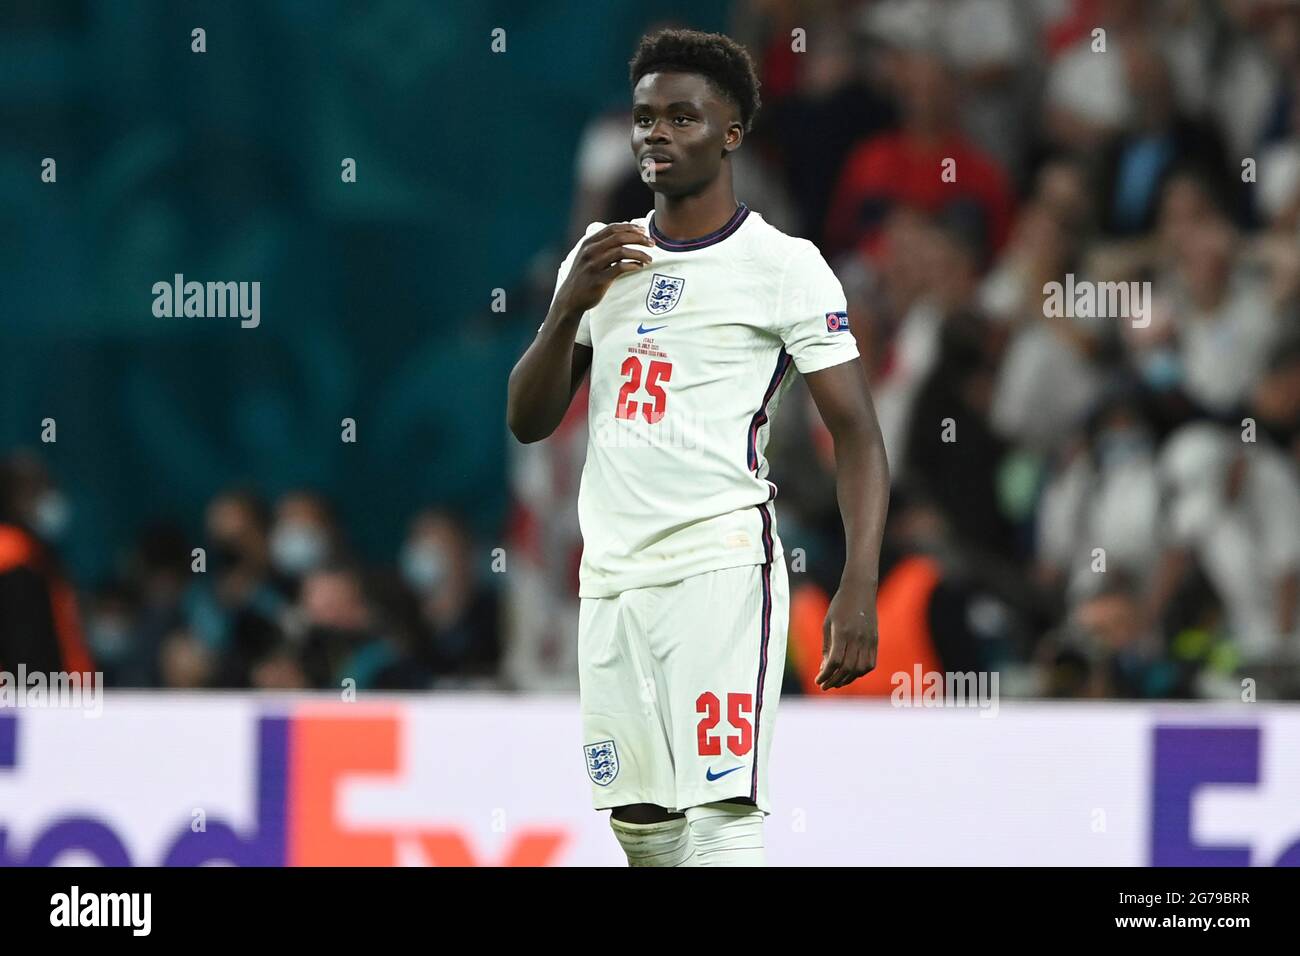 London, UK. 12th July, 2021. Bukayo SAKA (ENG) after missed penalty, penalty kick. Disappointment, frustrated, disappointed, frustrated, dejected, action, single image, cut single motif, half figure, half figure. Final, game M51, Italy (ITA) - England (ENG) 4-3 iE on 07/11/2021 in London/Wembley Stadium. Soccer Euro 2020 from 11.06.2021-11.07.2021. Photo; Marvin Guengoer/GES/Pool via Sven Simon Fotoagentur GmbH & Co. Press photo KG # Prinzess-Luise-Str. 41 # 45479 M uelheim/R uhr # Tel. 0208/9413250 # Fax. 0208/9413260 # GLS Bank # BLZ 430 609 67 # Account 4030 025 100 # IBAN DE75 4306 0967 40 Stock Photo